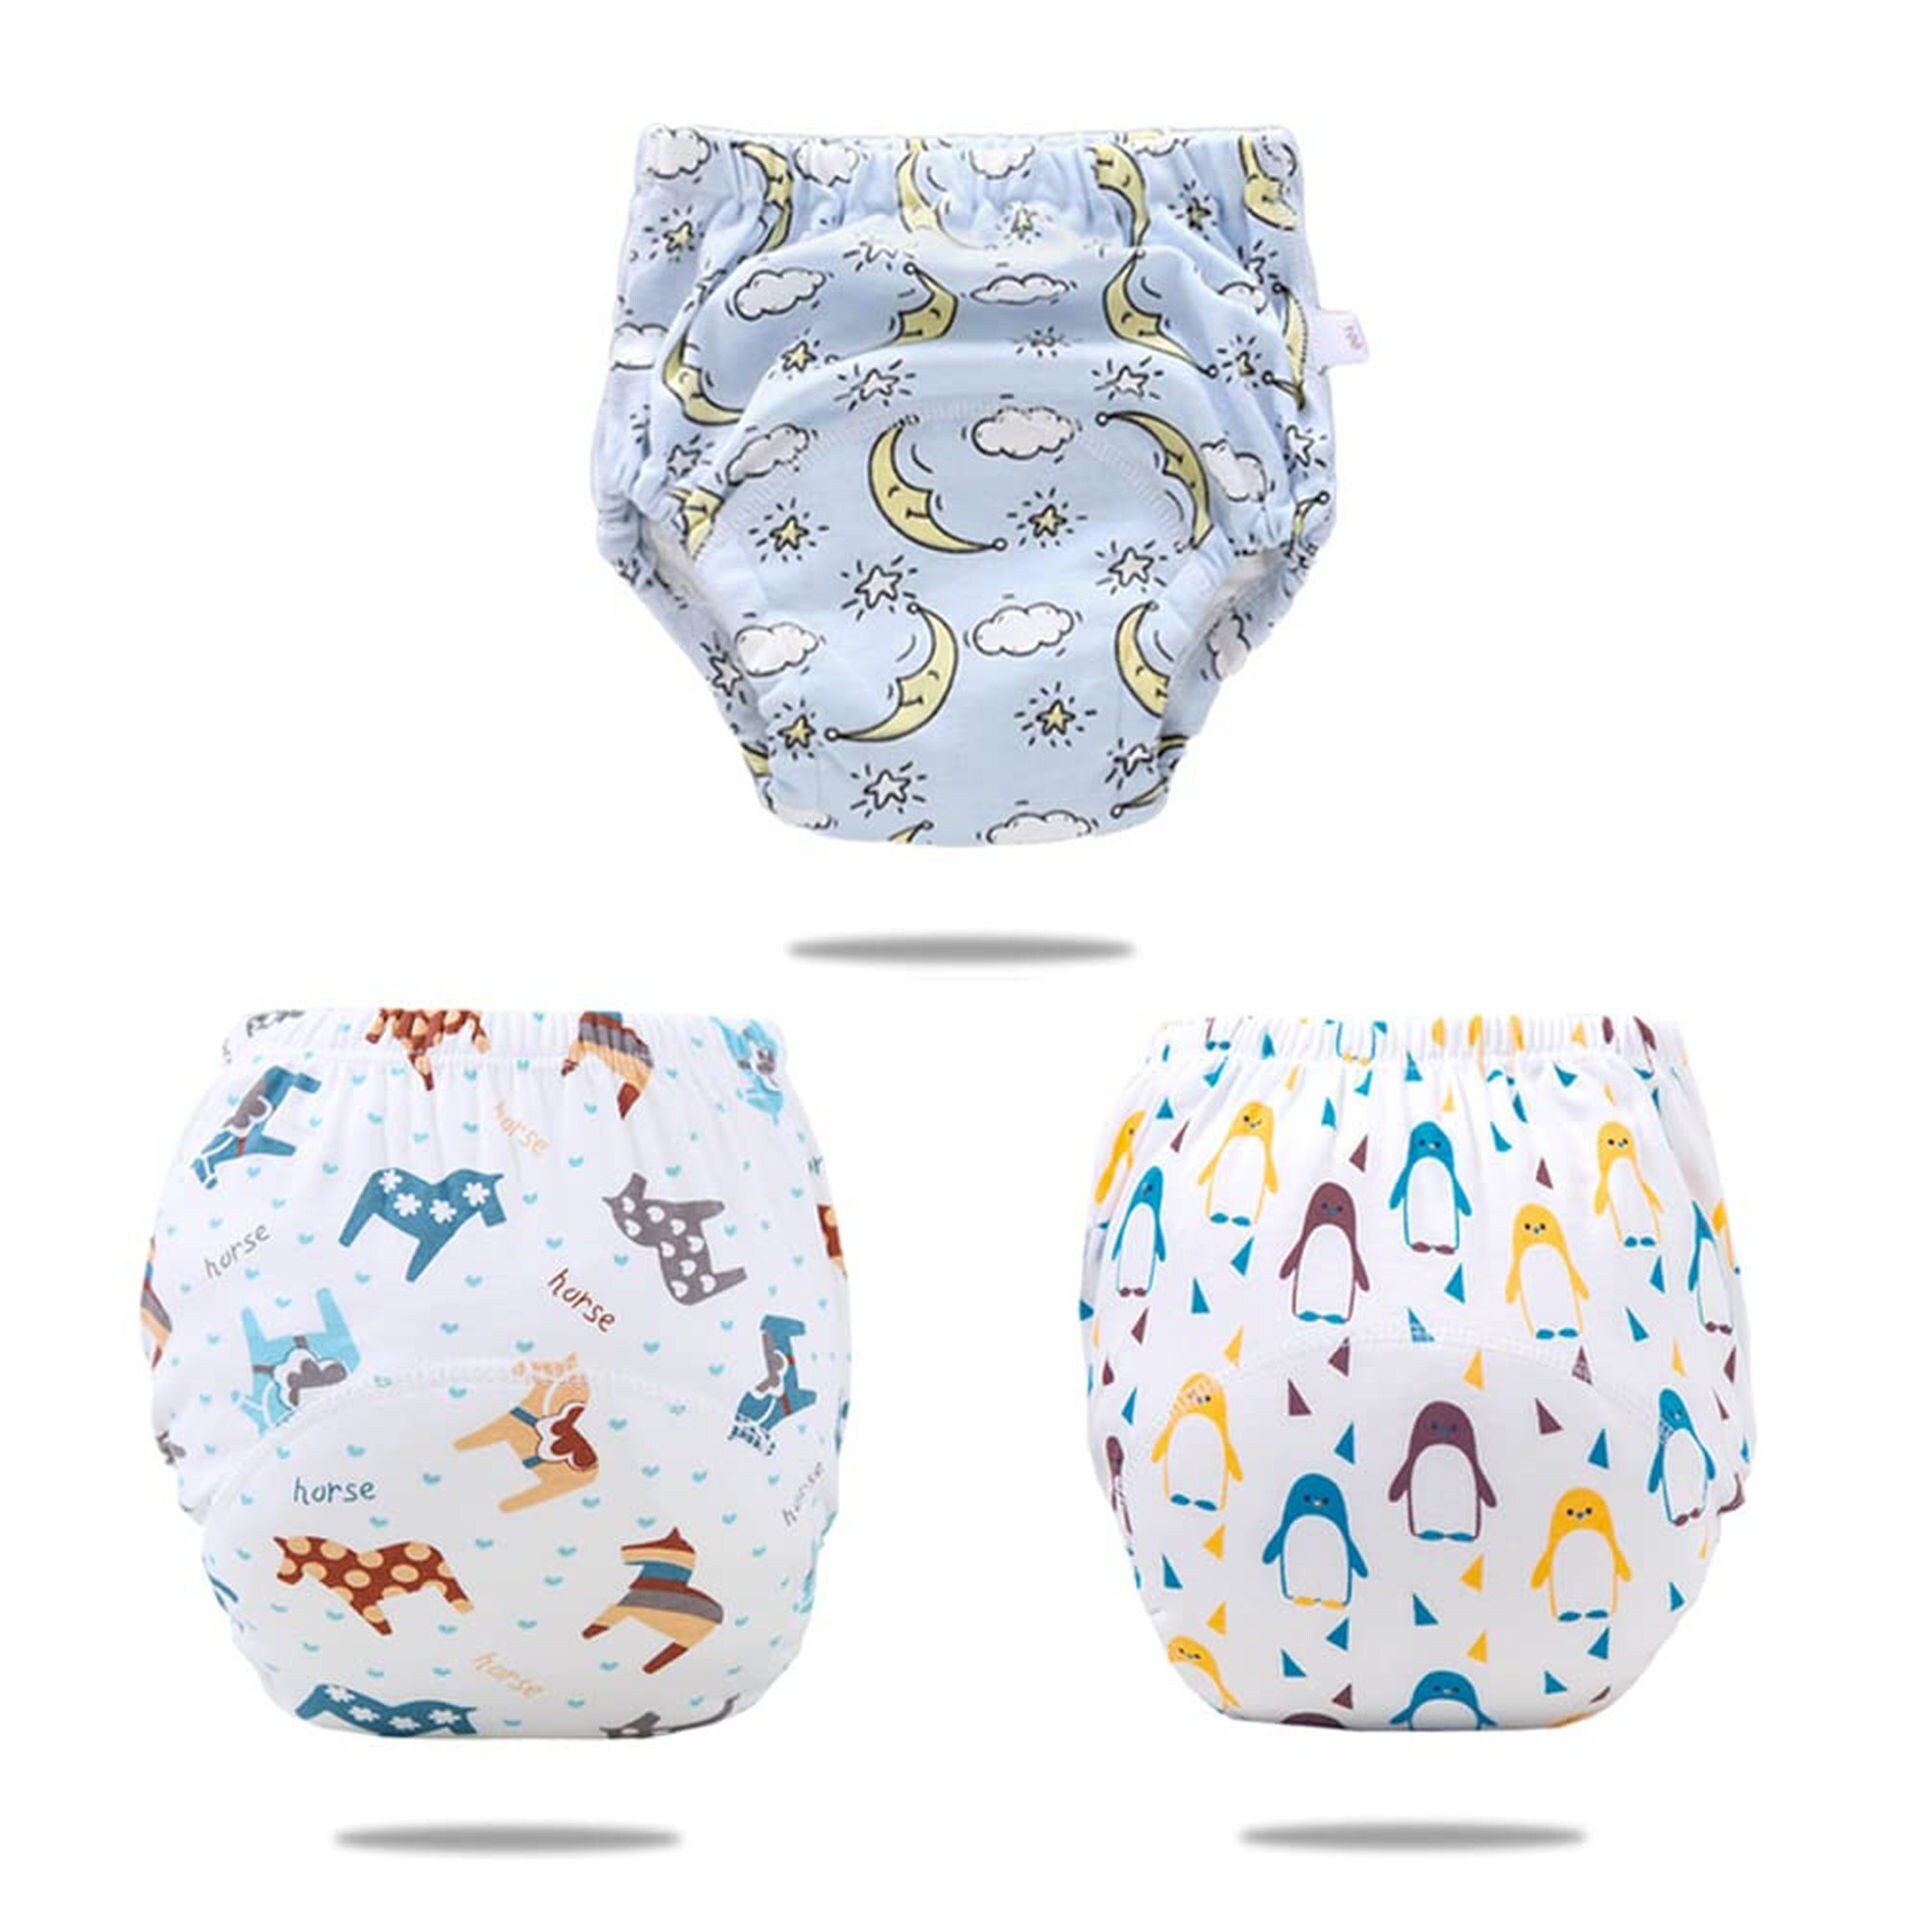 Baby Potty Training Pants, Cotton Potty Training Pants For Babies